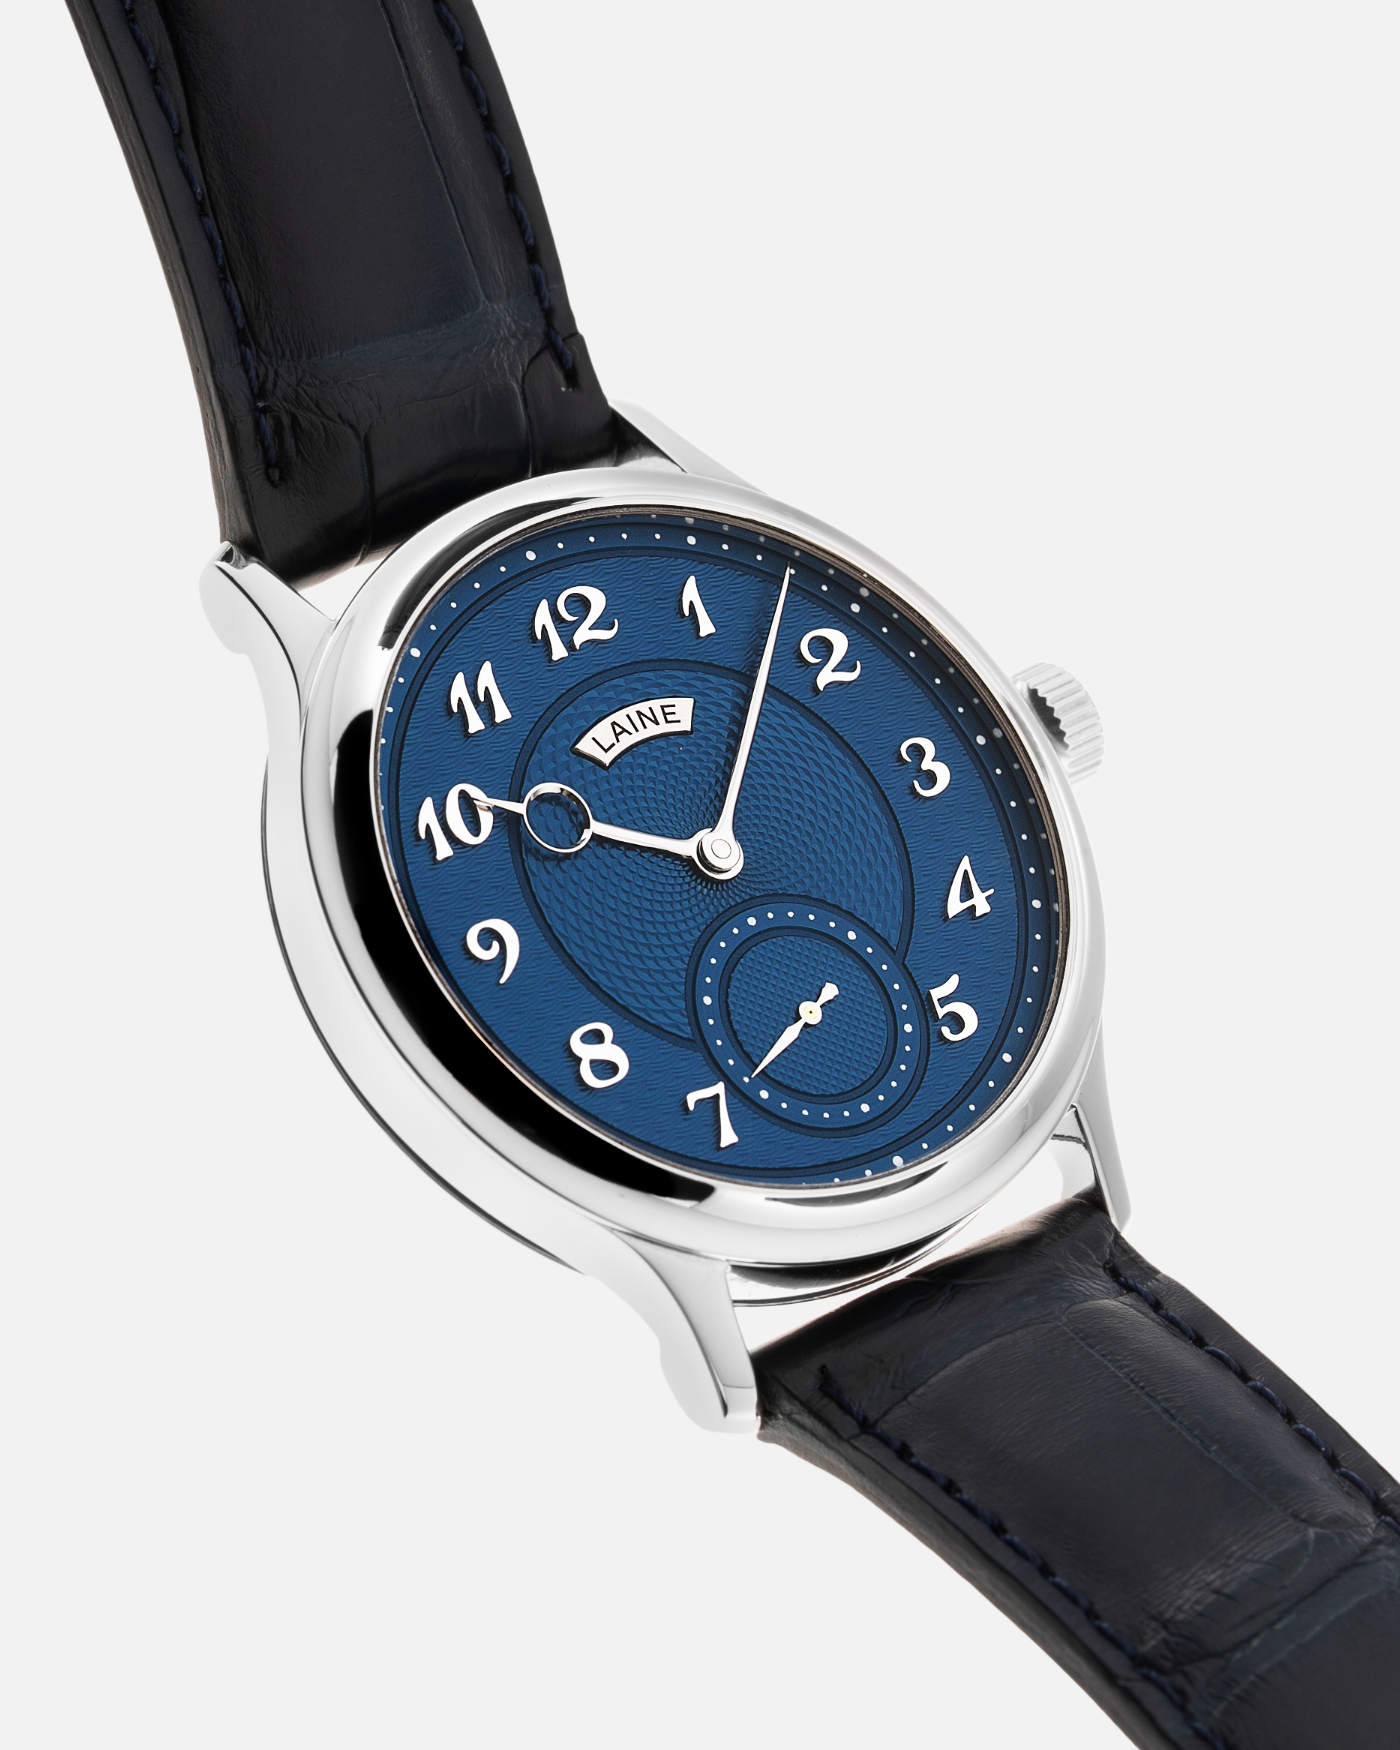 Brand: Laine Year: 2021 Model: V38 Material: Stainless Steel Movement: Vaucher VMF 5401  Case Diameter: 38mm Strap: Dark Blue Laine Alligator Strap and Signed Stainless Steel Tang Buckle